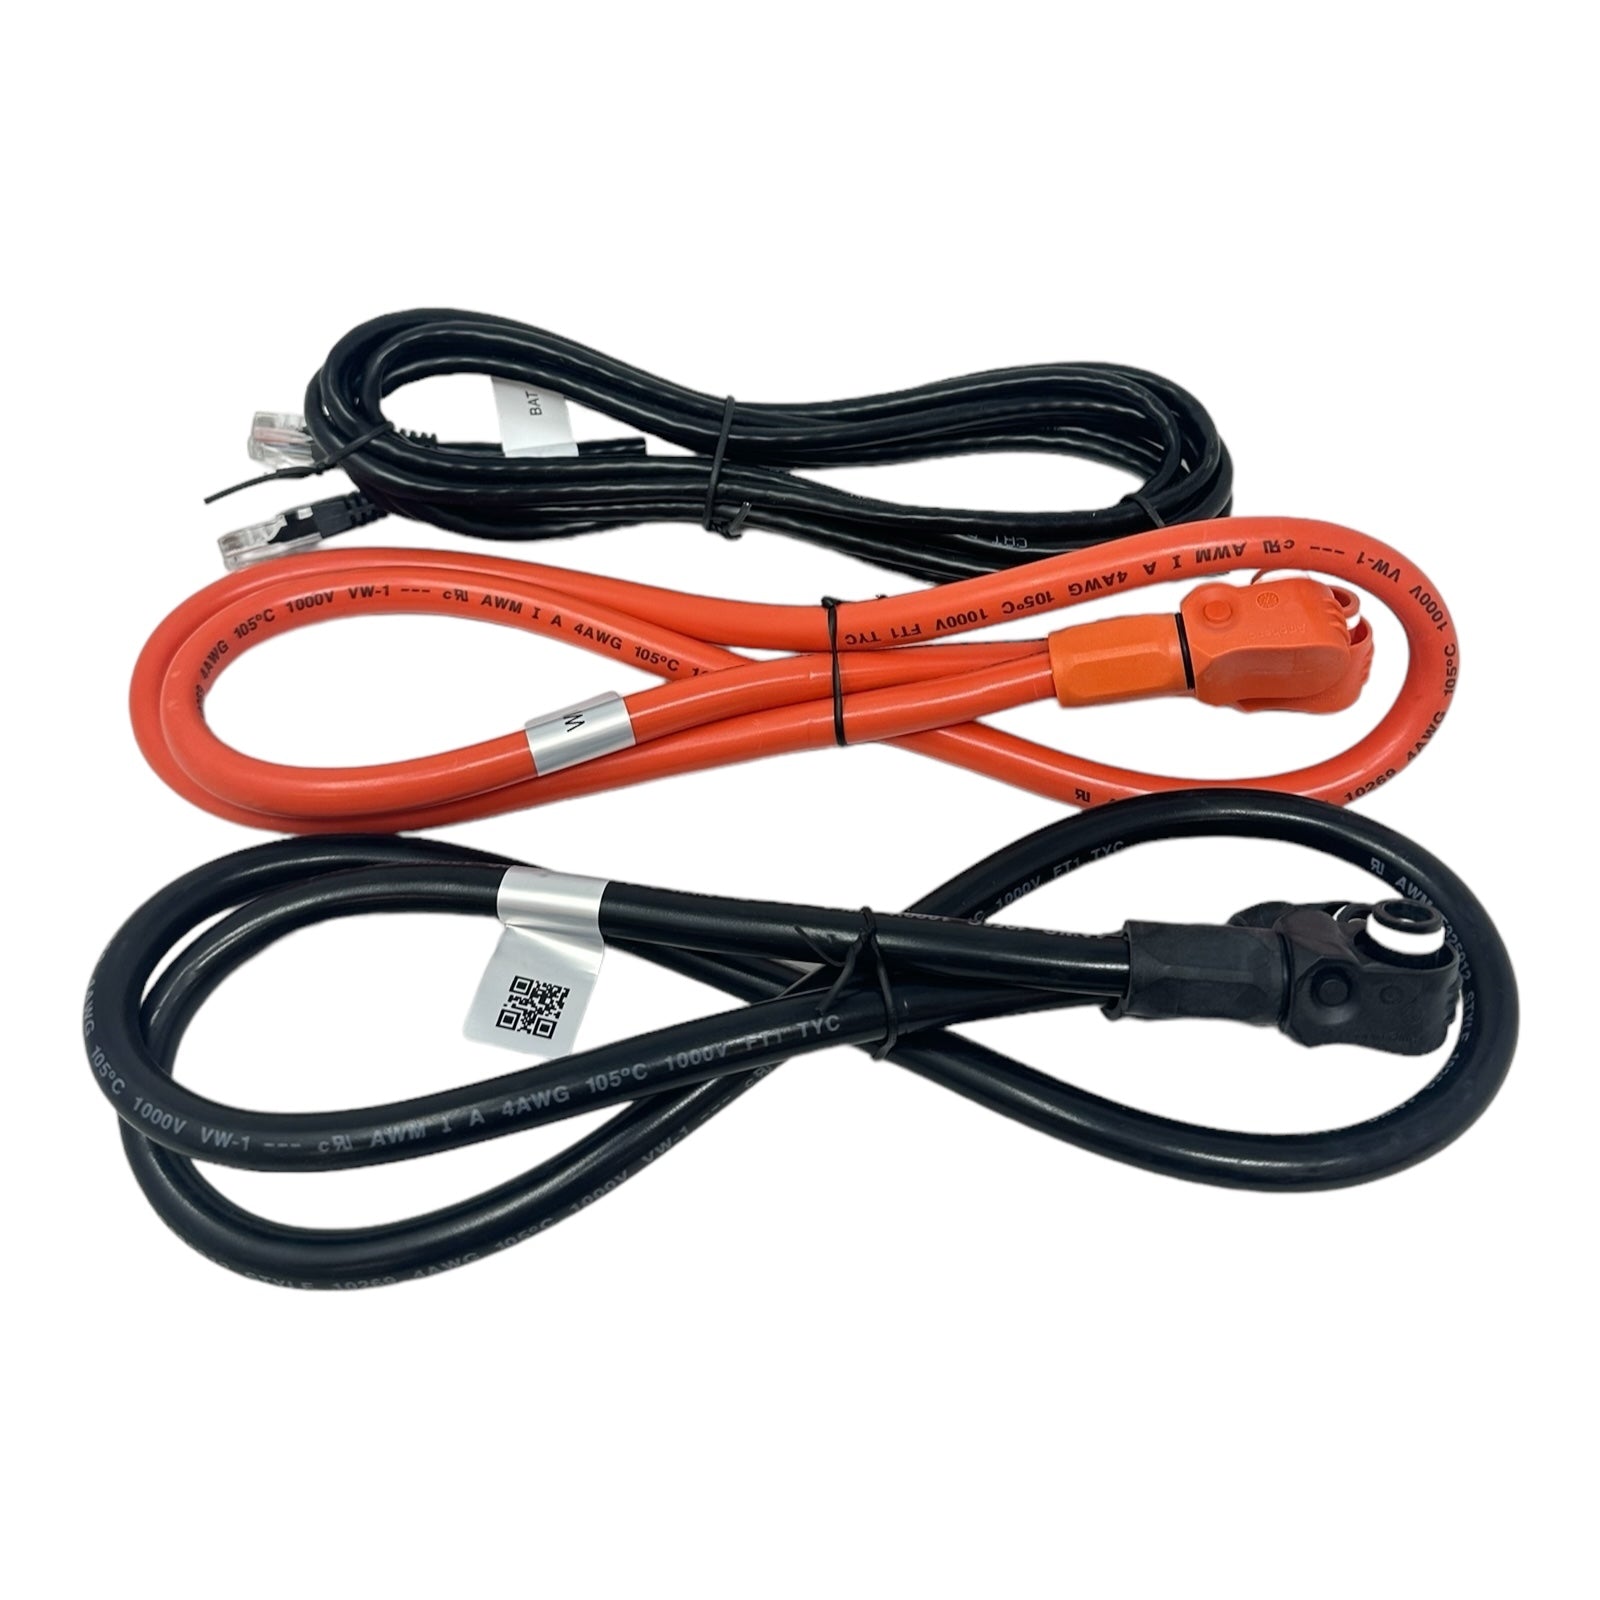 Long Power Cables For Lithium Batteries 1000mm Male/female, Red/Black US5000 US2000